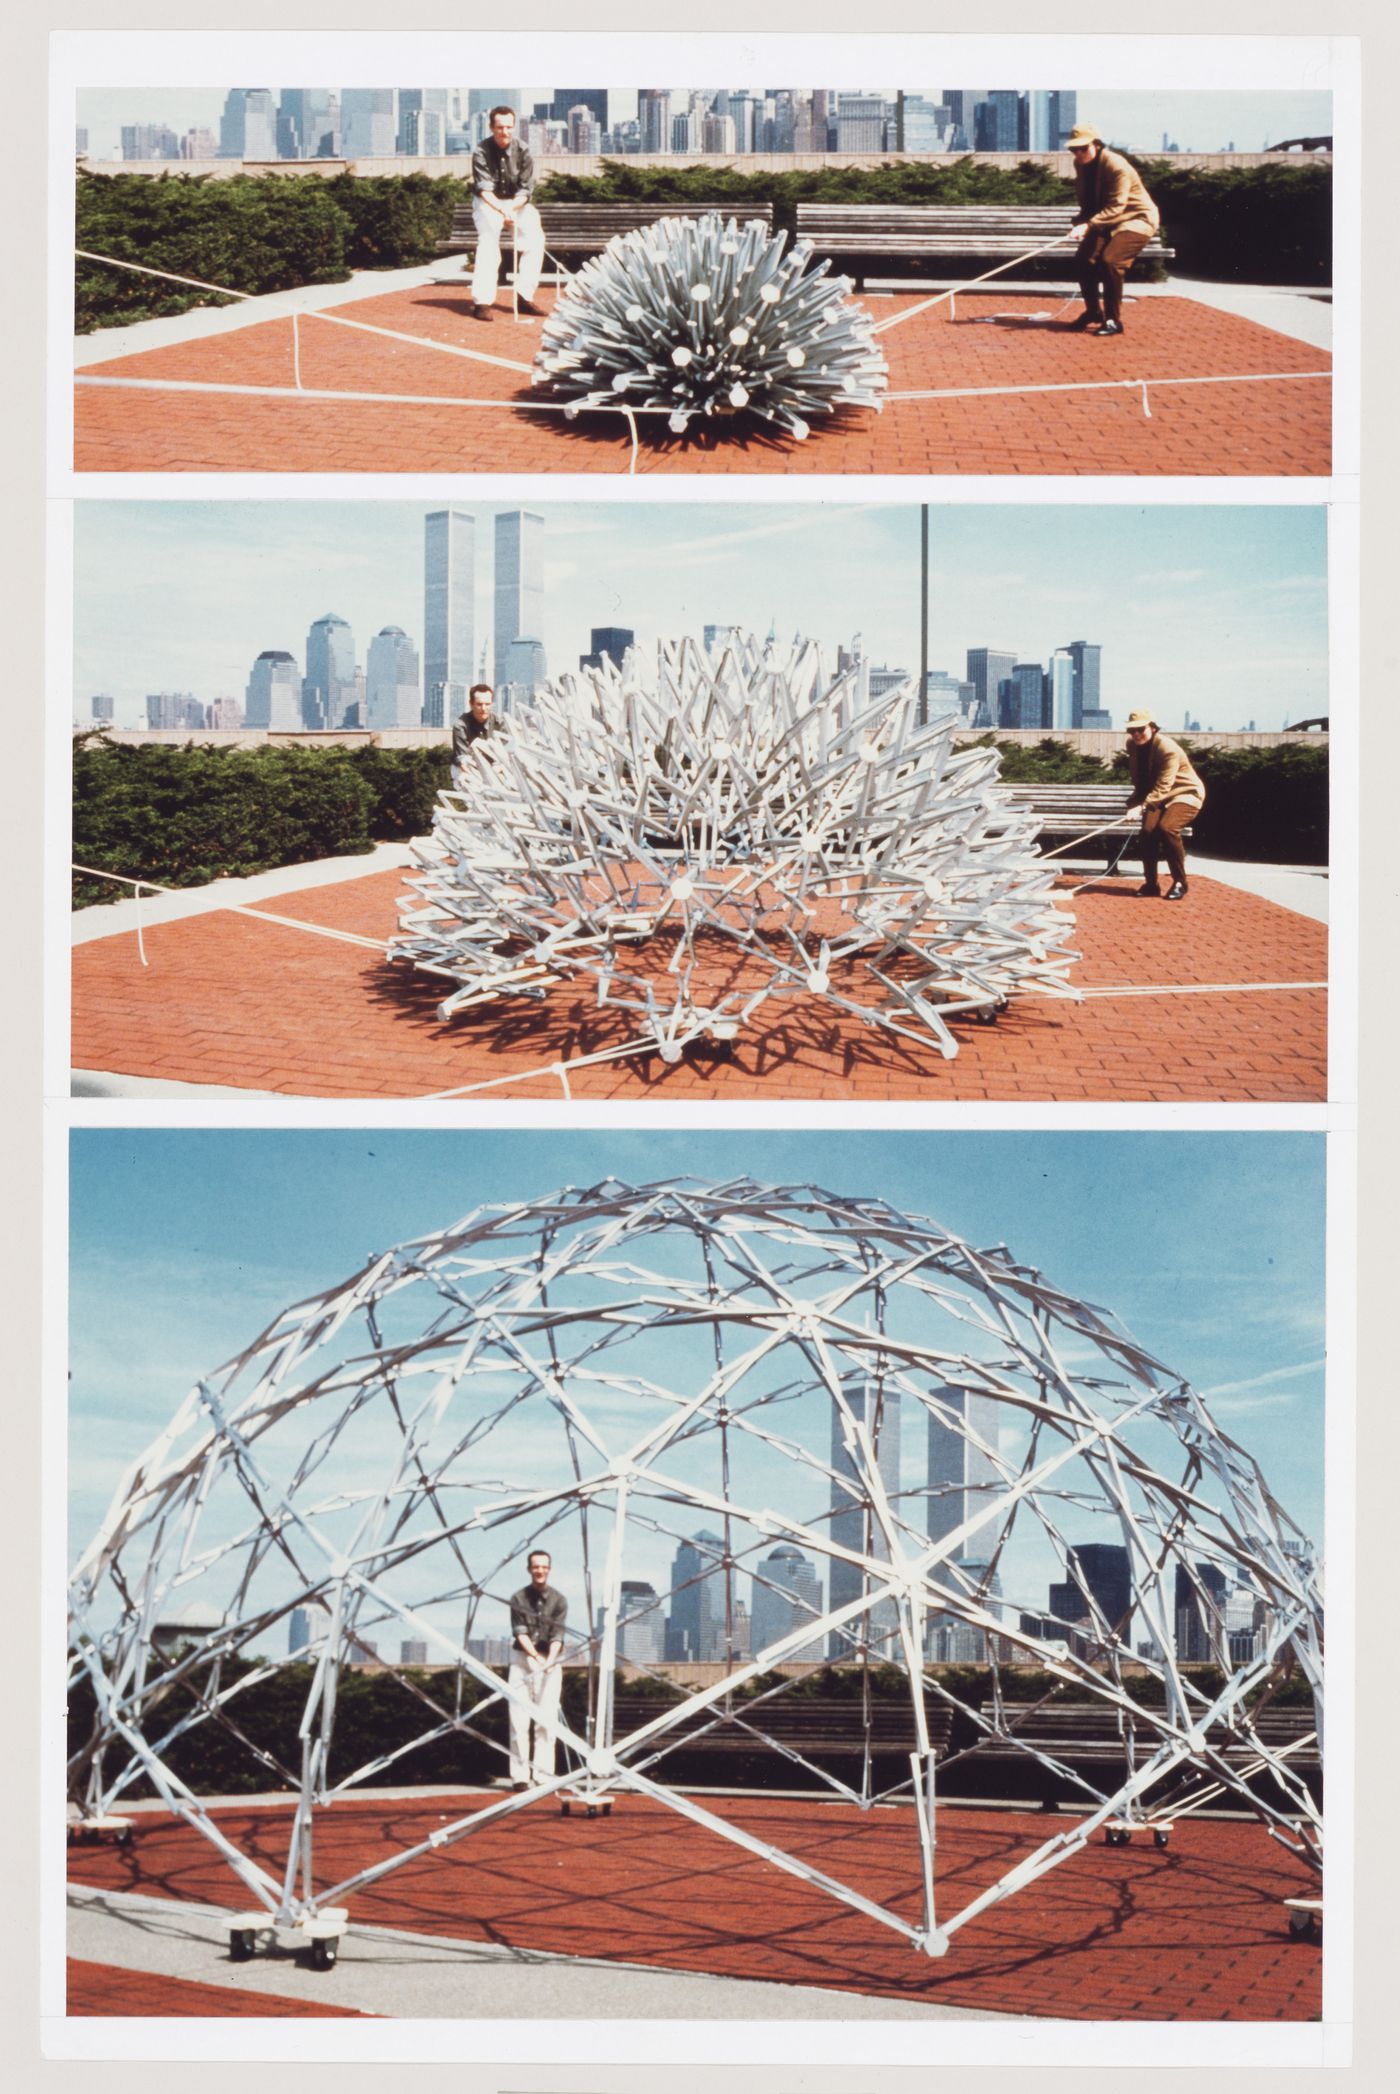 Expanding Geodesic Dome, Liberty State Park, Jersey City, New Jersey